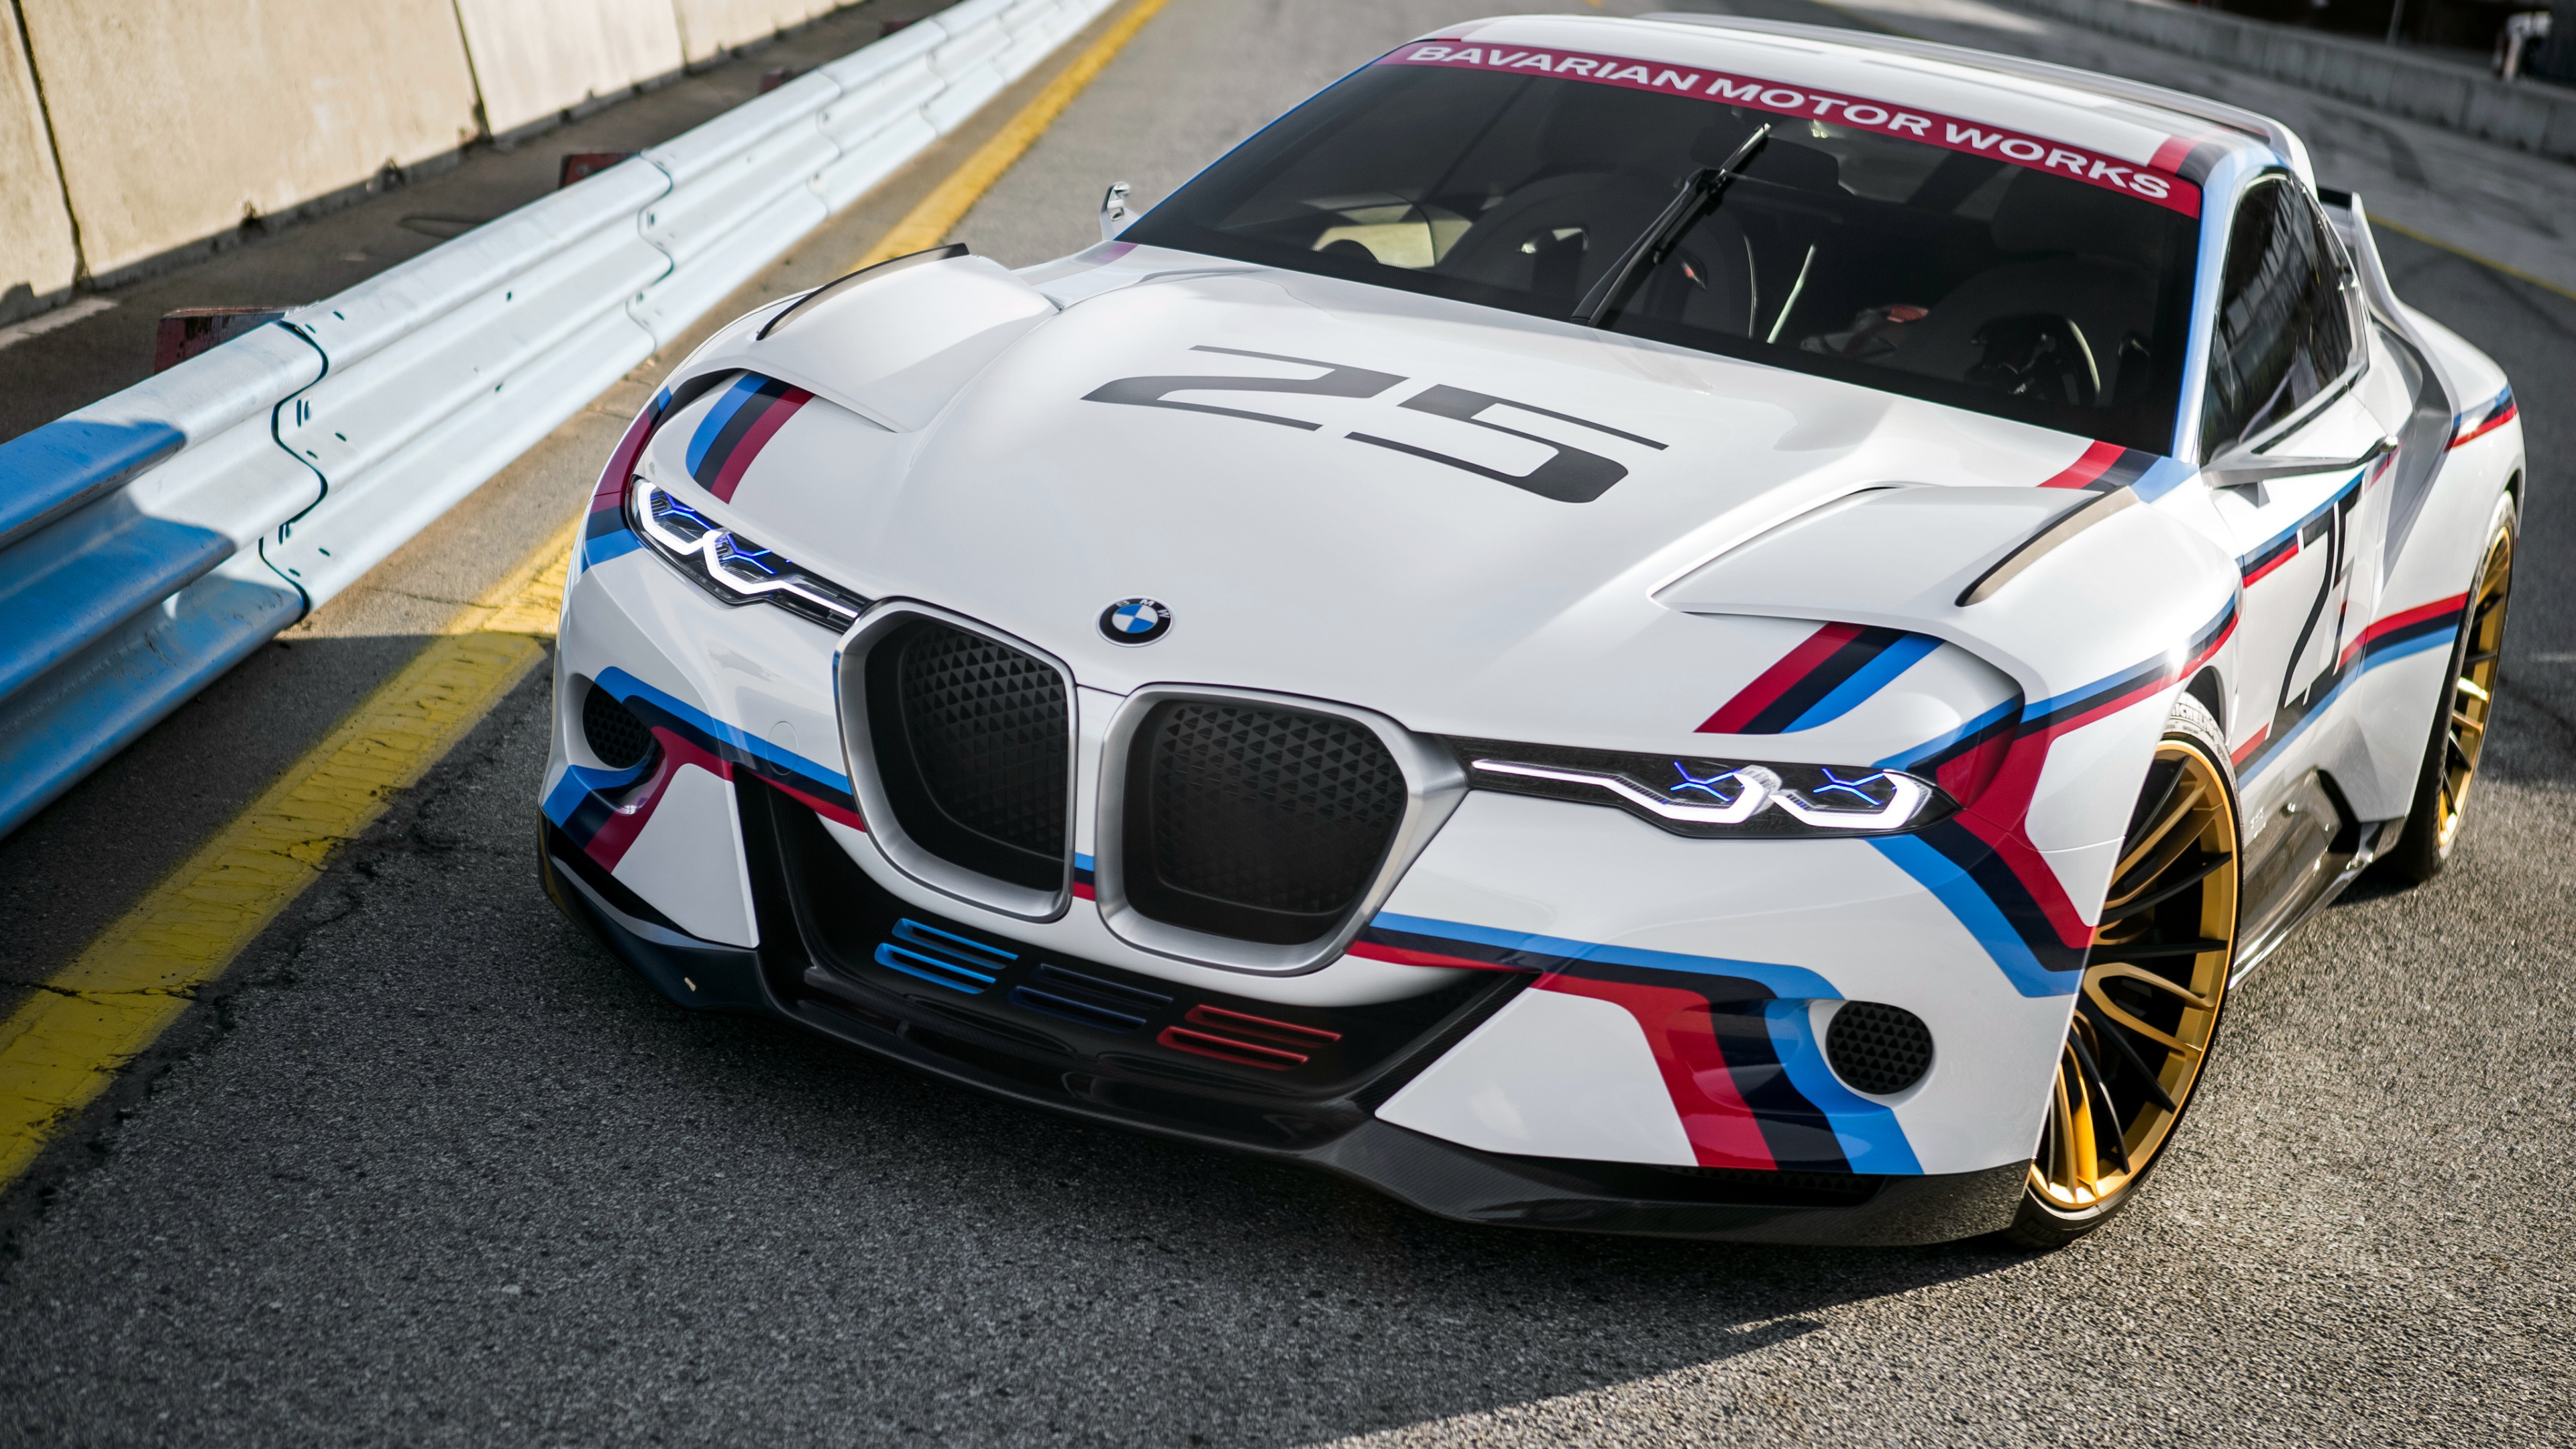 Bmw 3 0 Csl Hommage R 4k Wallpaper Racing Cars Supercars Cars 1208